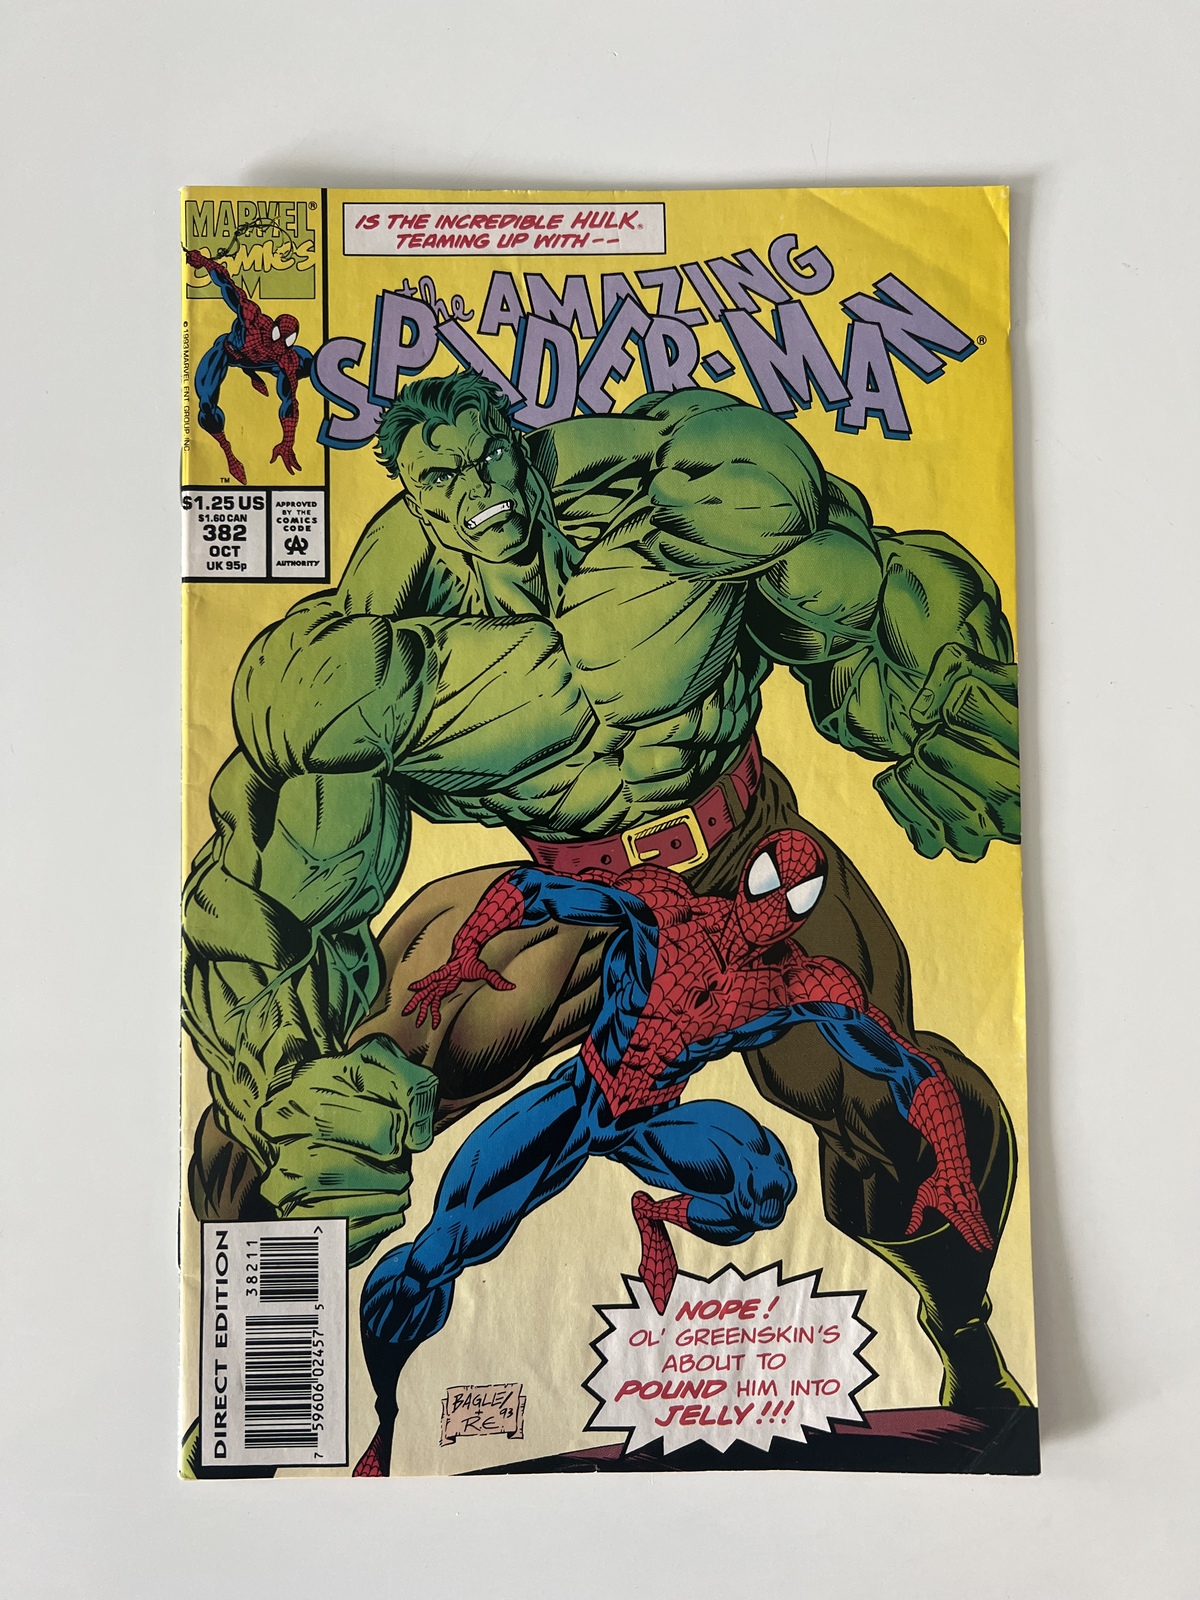 Primary image for The Amazing Spider-Man #382 Oct 1993 comic book